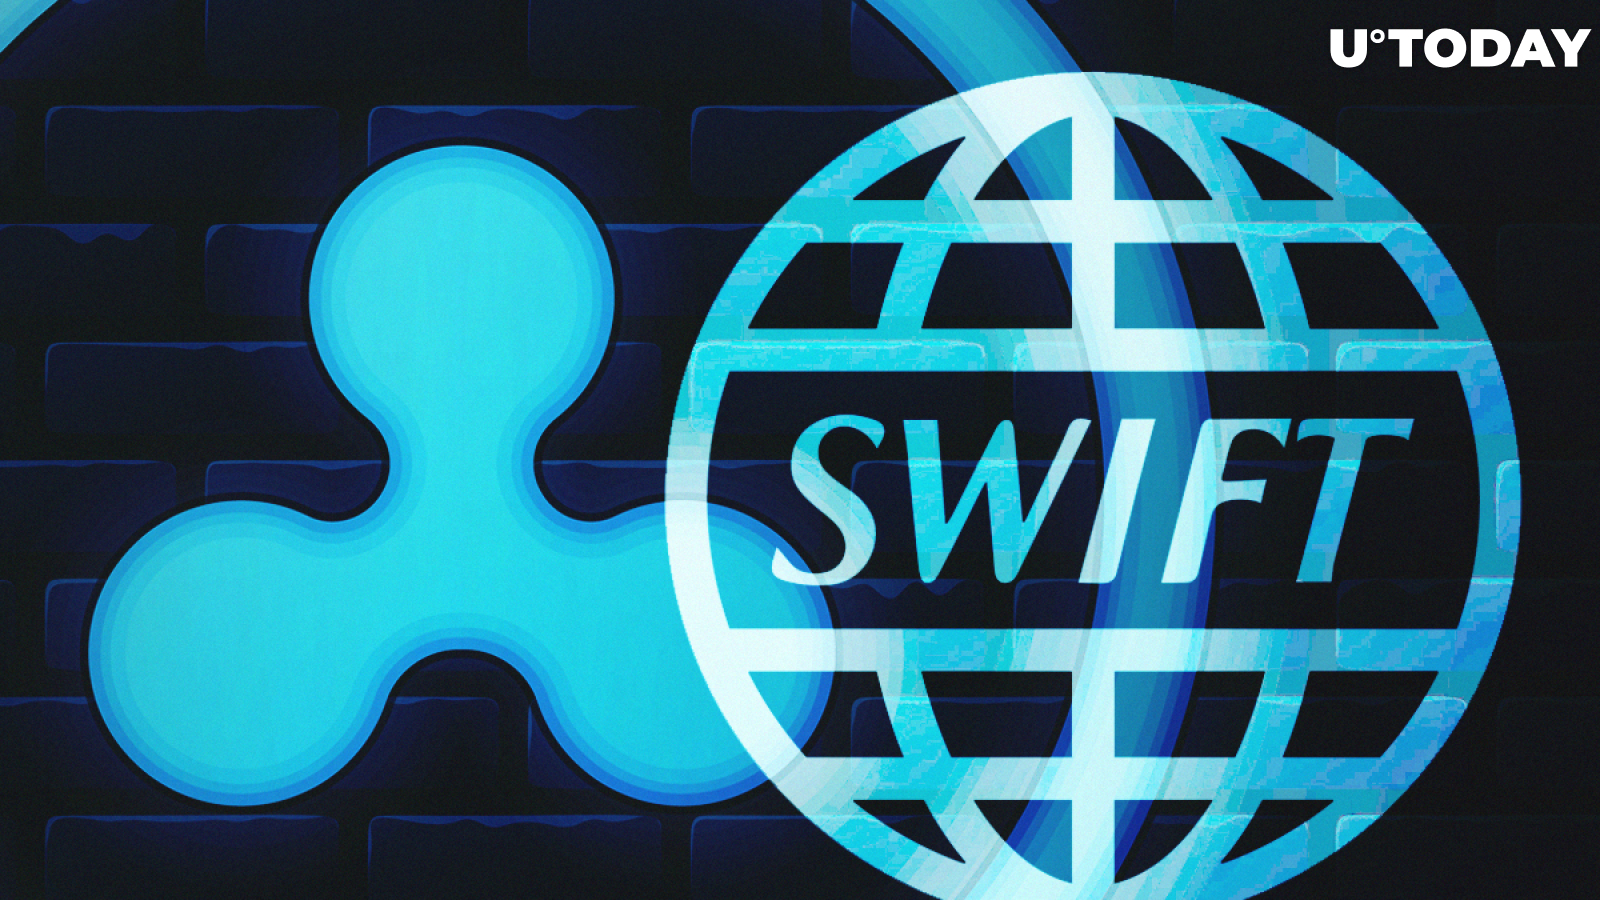 Ripple’s High Speed and Low Cost Approved by SWIFT, Media Reports